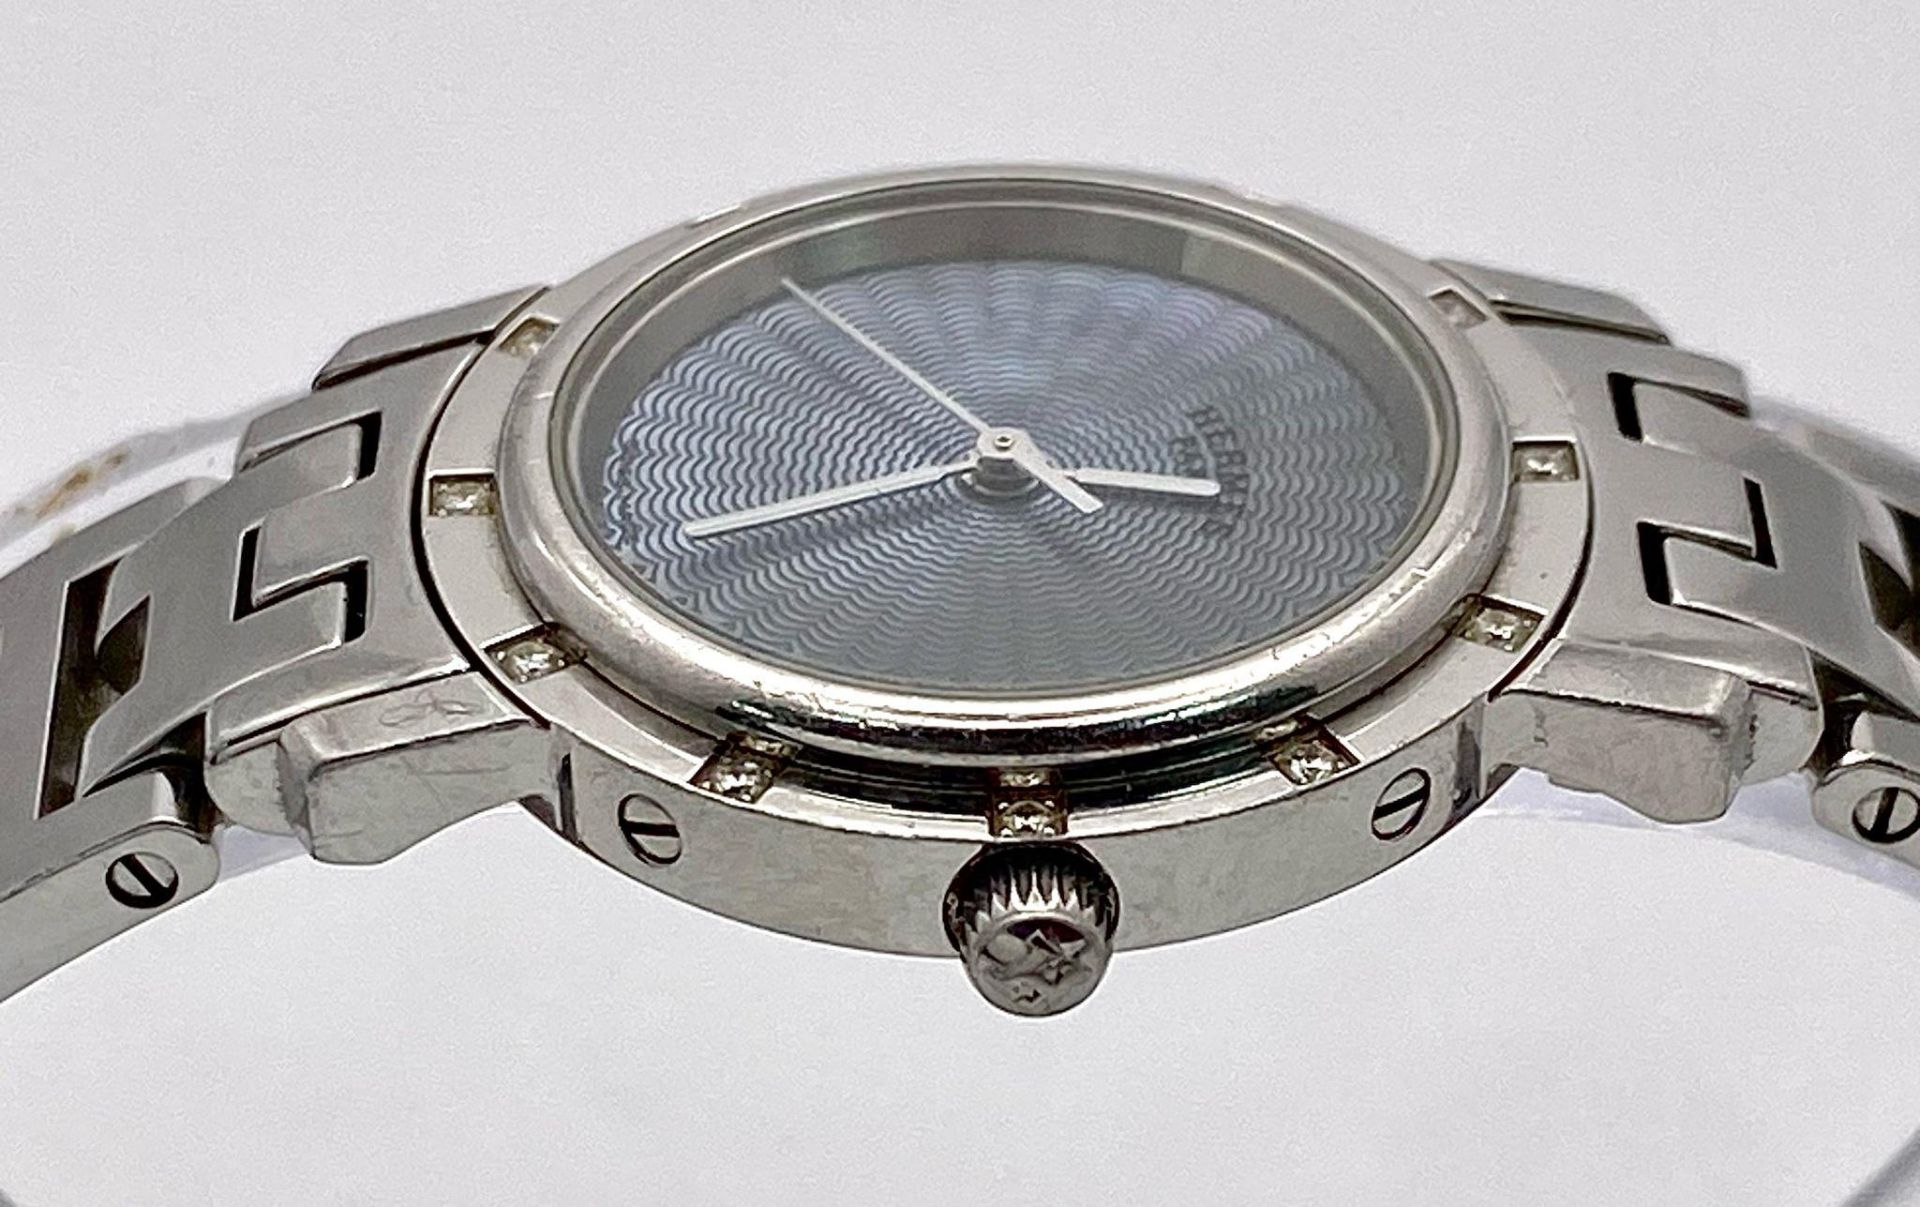 A "HERMES" STAINLESS STEEL LADIES QUARTZ WATCH WITH DIAMOND OUTER BEZEL. 24mm - Image 5 of 8